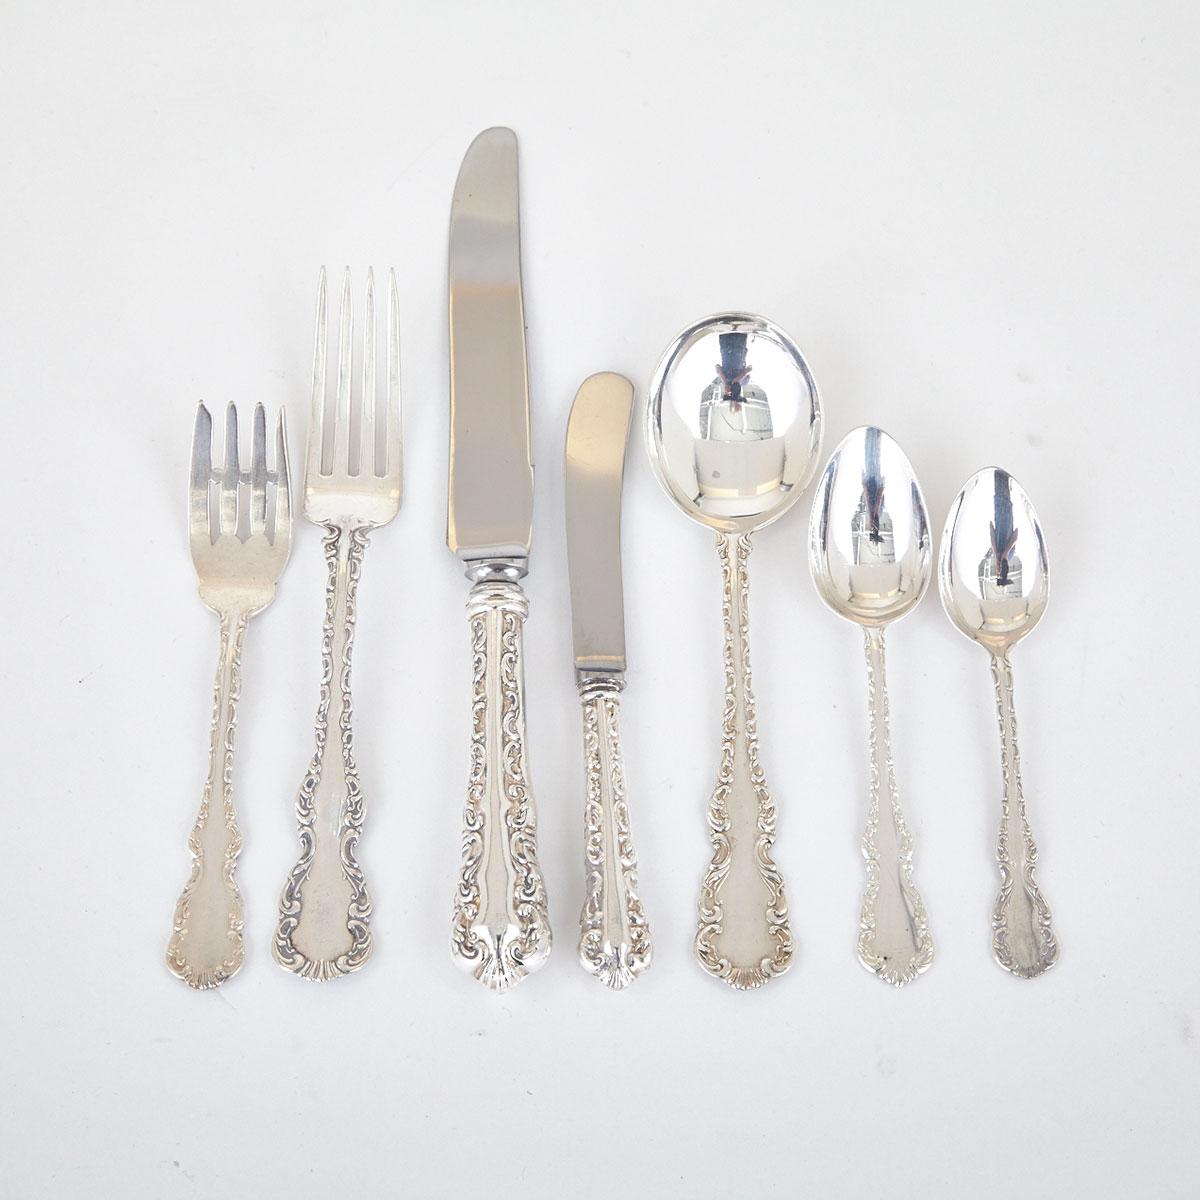 Canadian Silver ‘Louis XV’ Pattern Flatware Service, Henry Birks & Sons, Montreal, Que., 20th century 